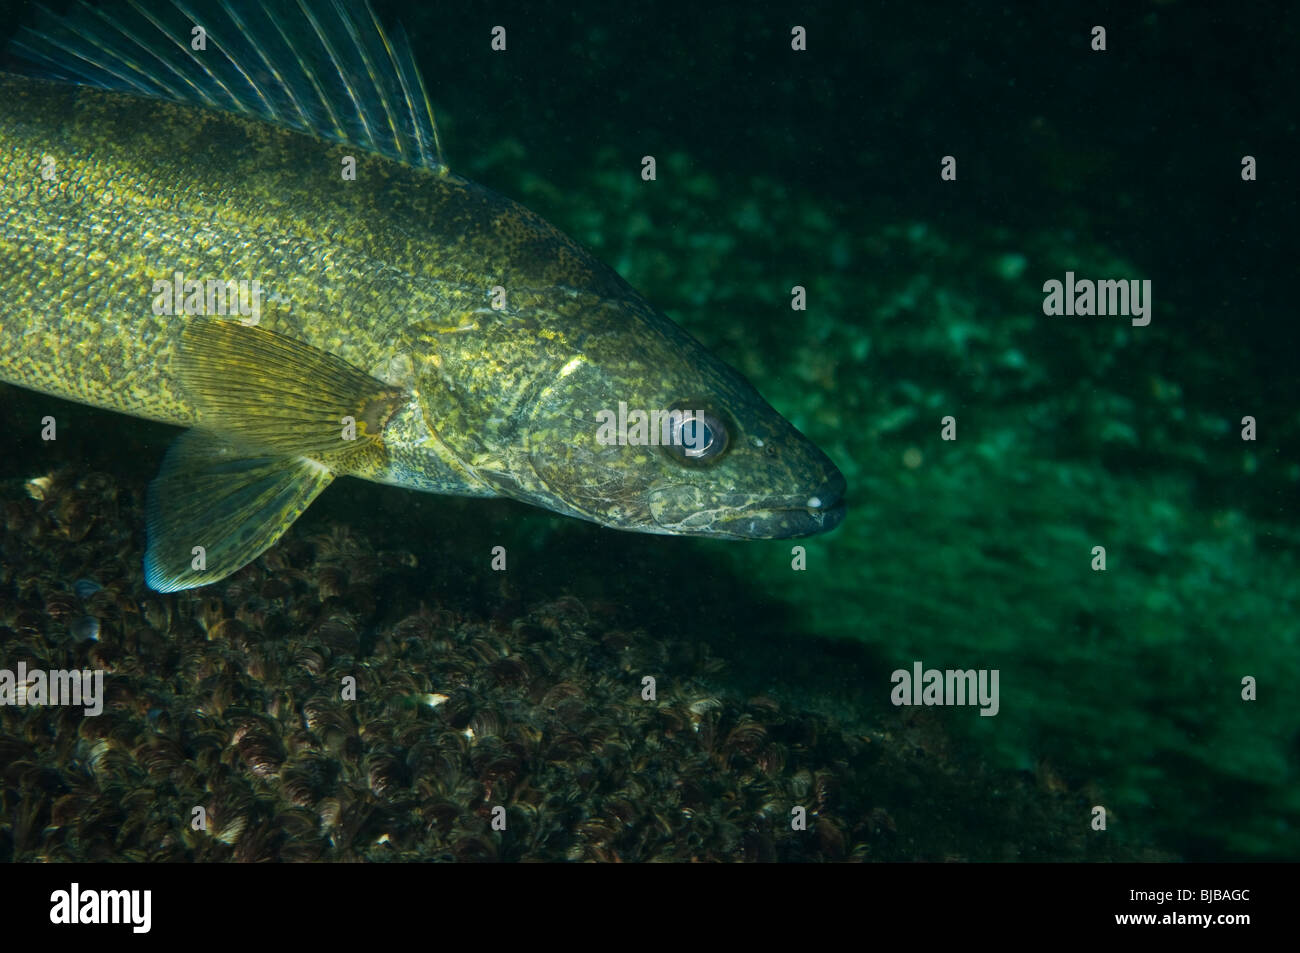 Walleye underwater in the St. Lawrence River in Canada Stock Photo - Alamy